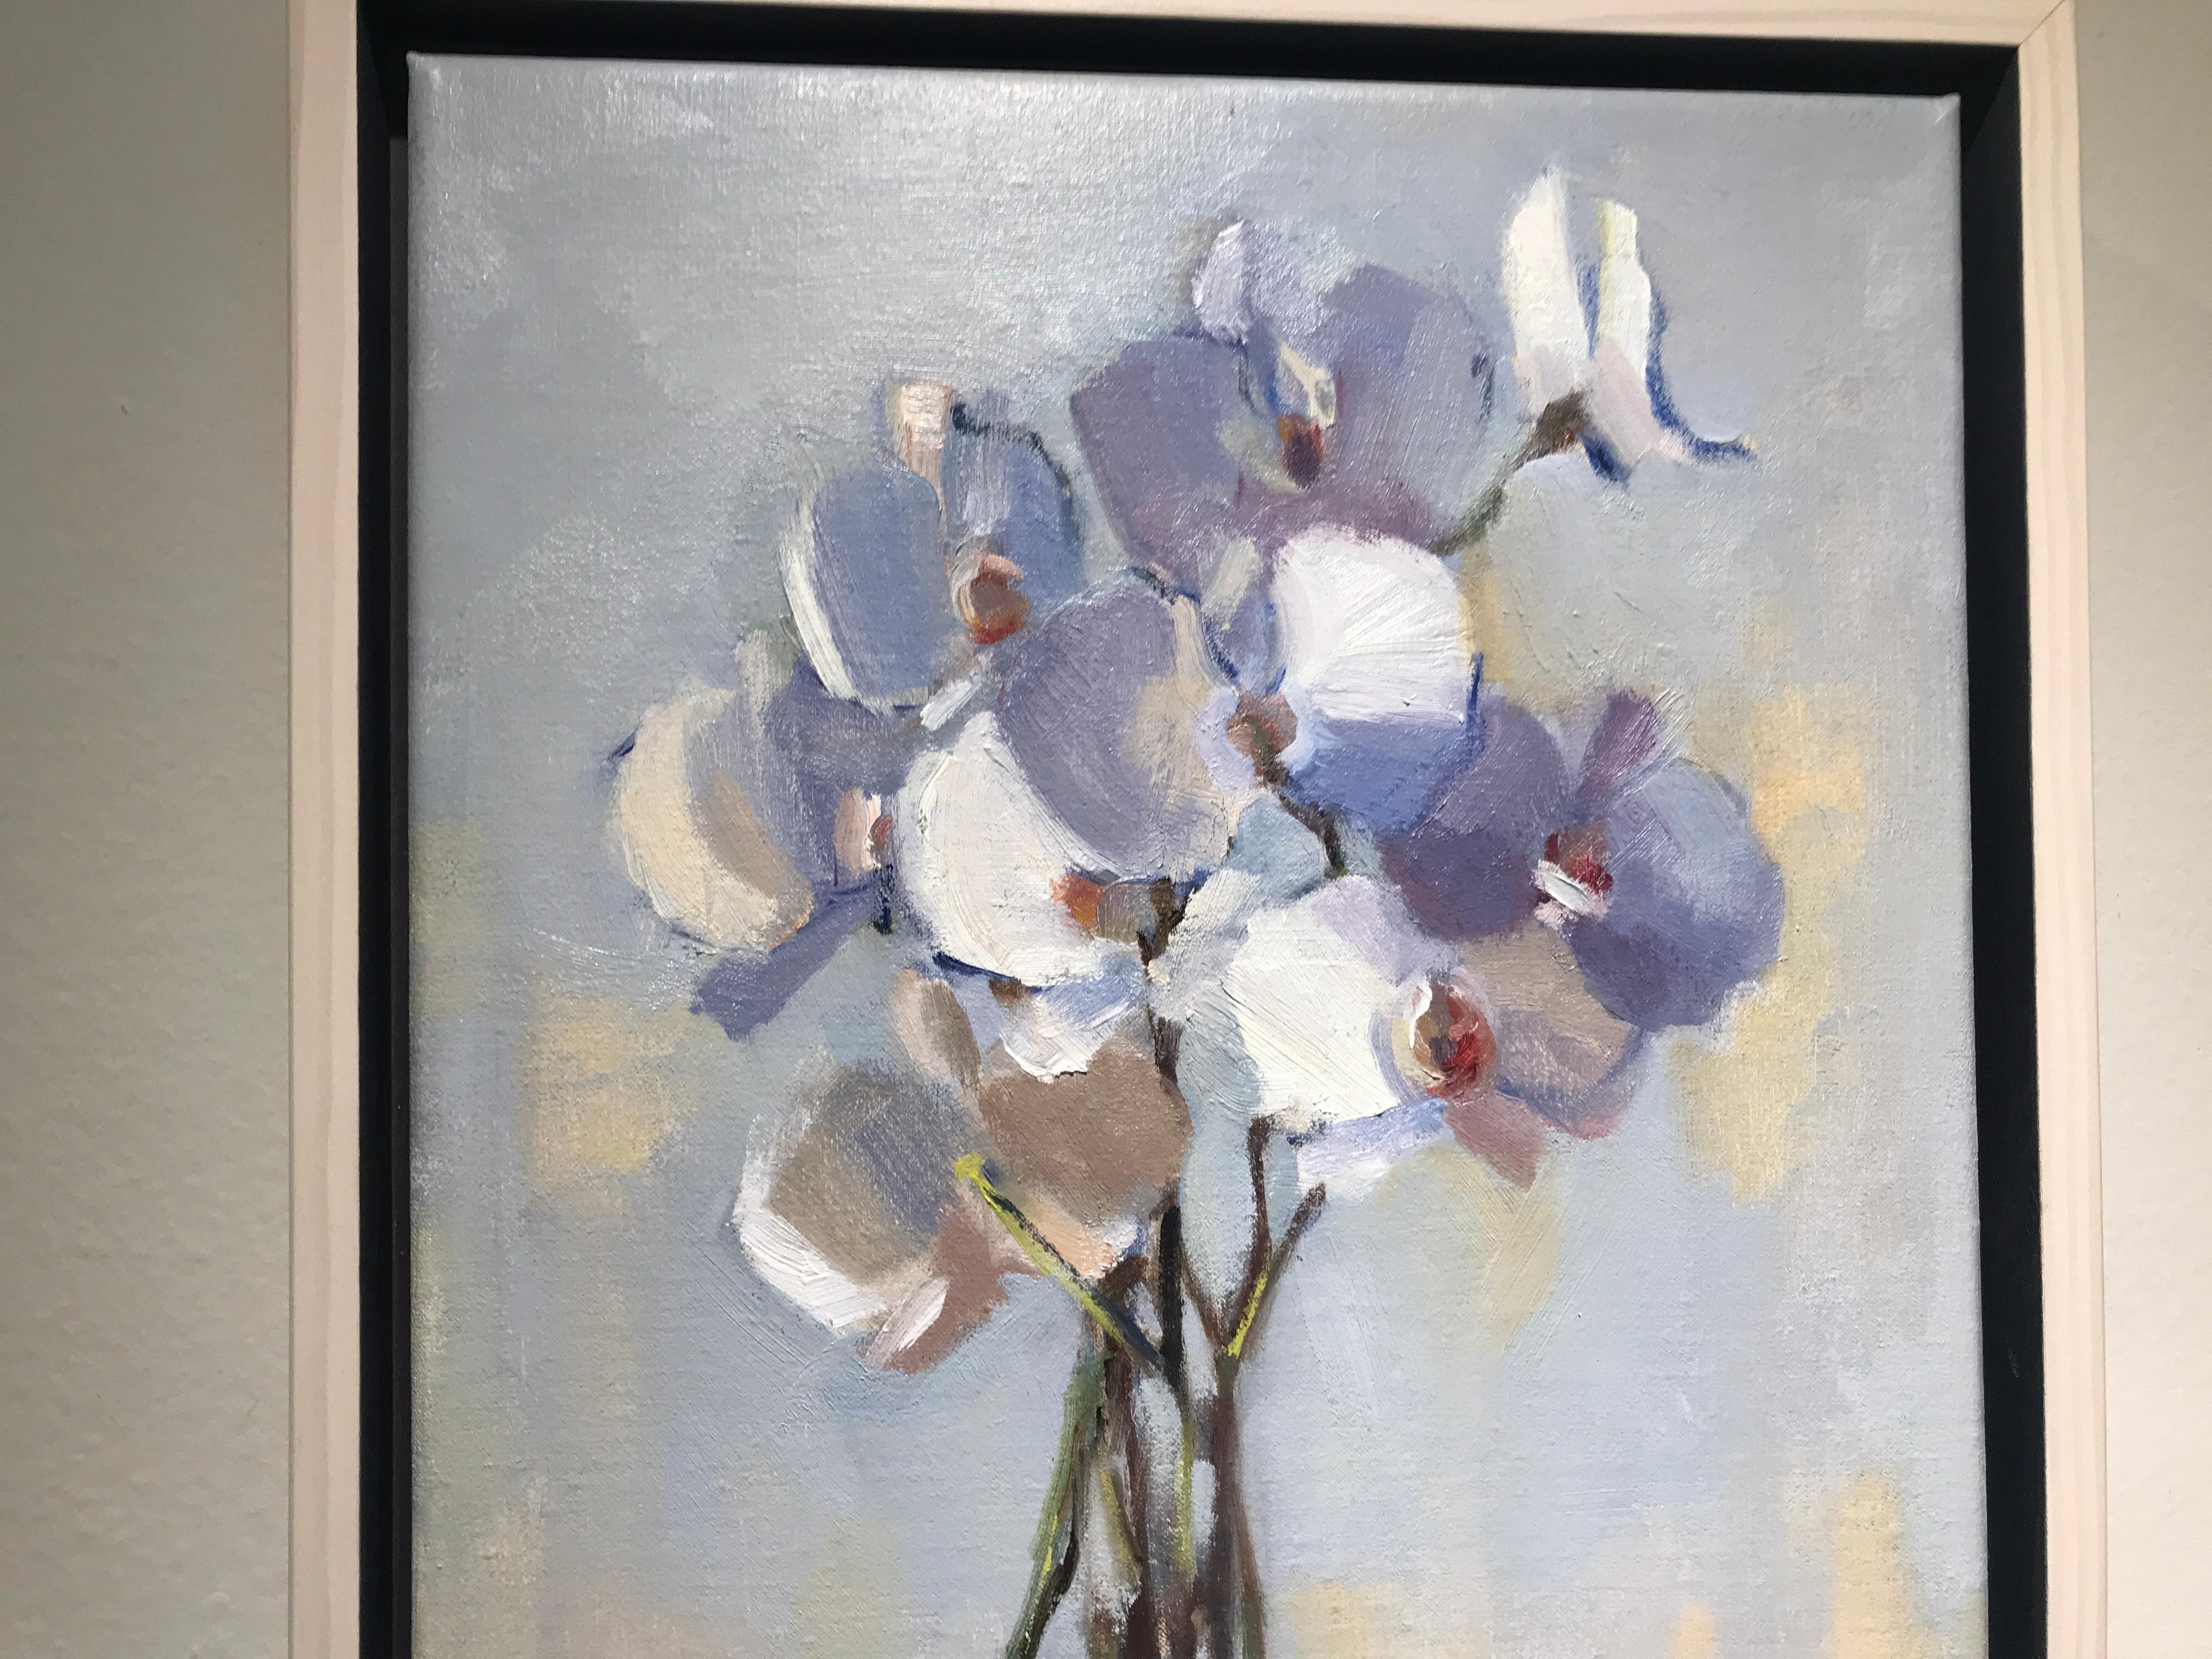 Into the Light, Lesley Powell Framed Floral Oil on Linen Still-life Painting 5